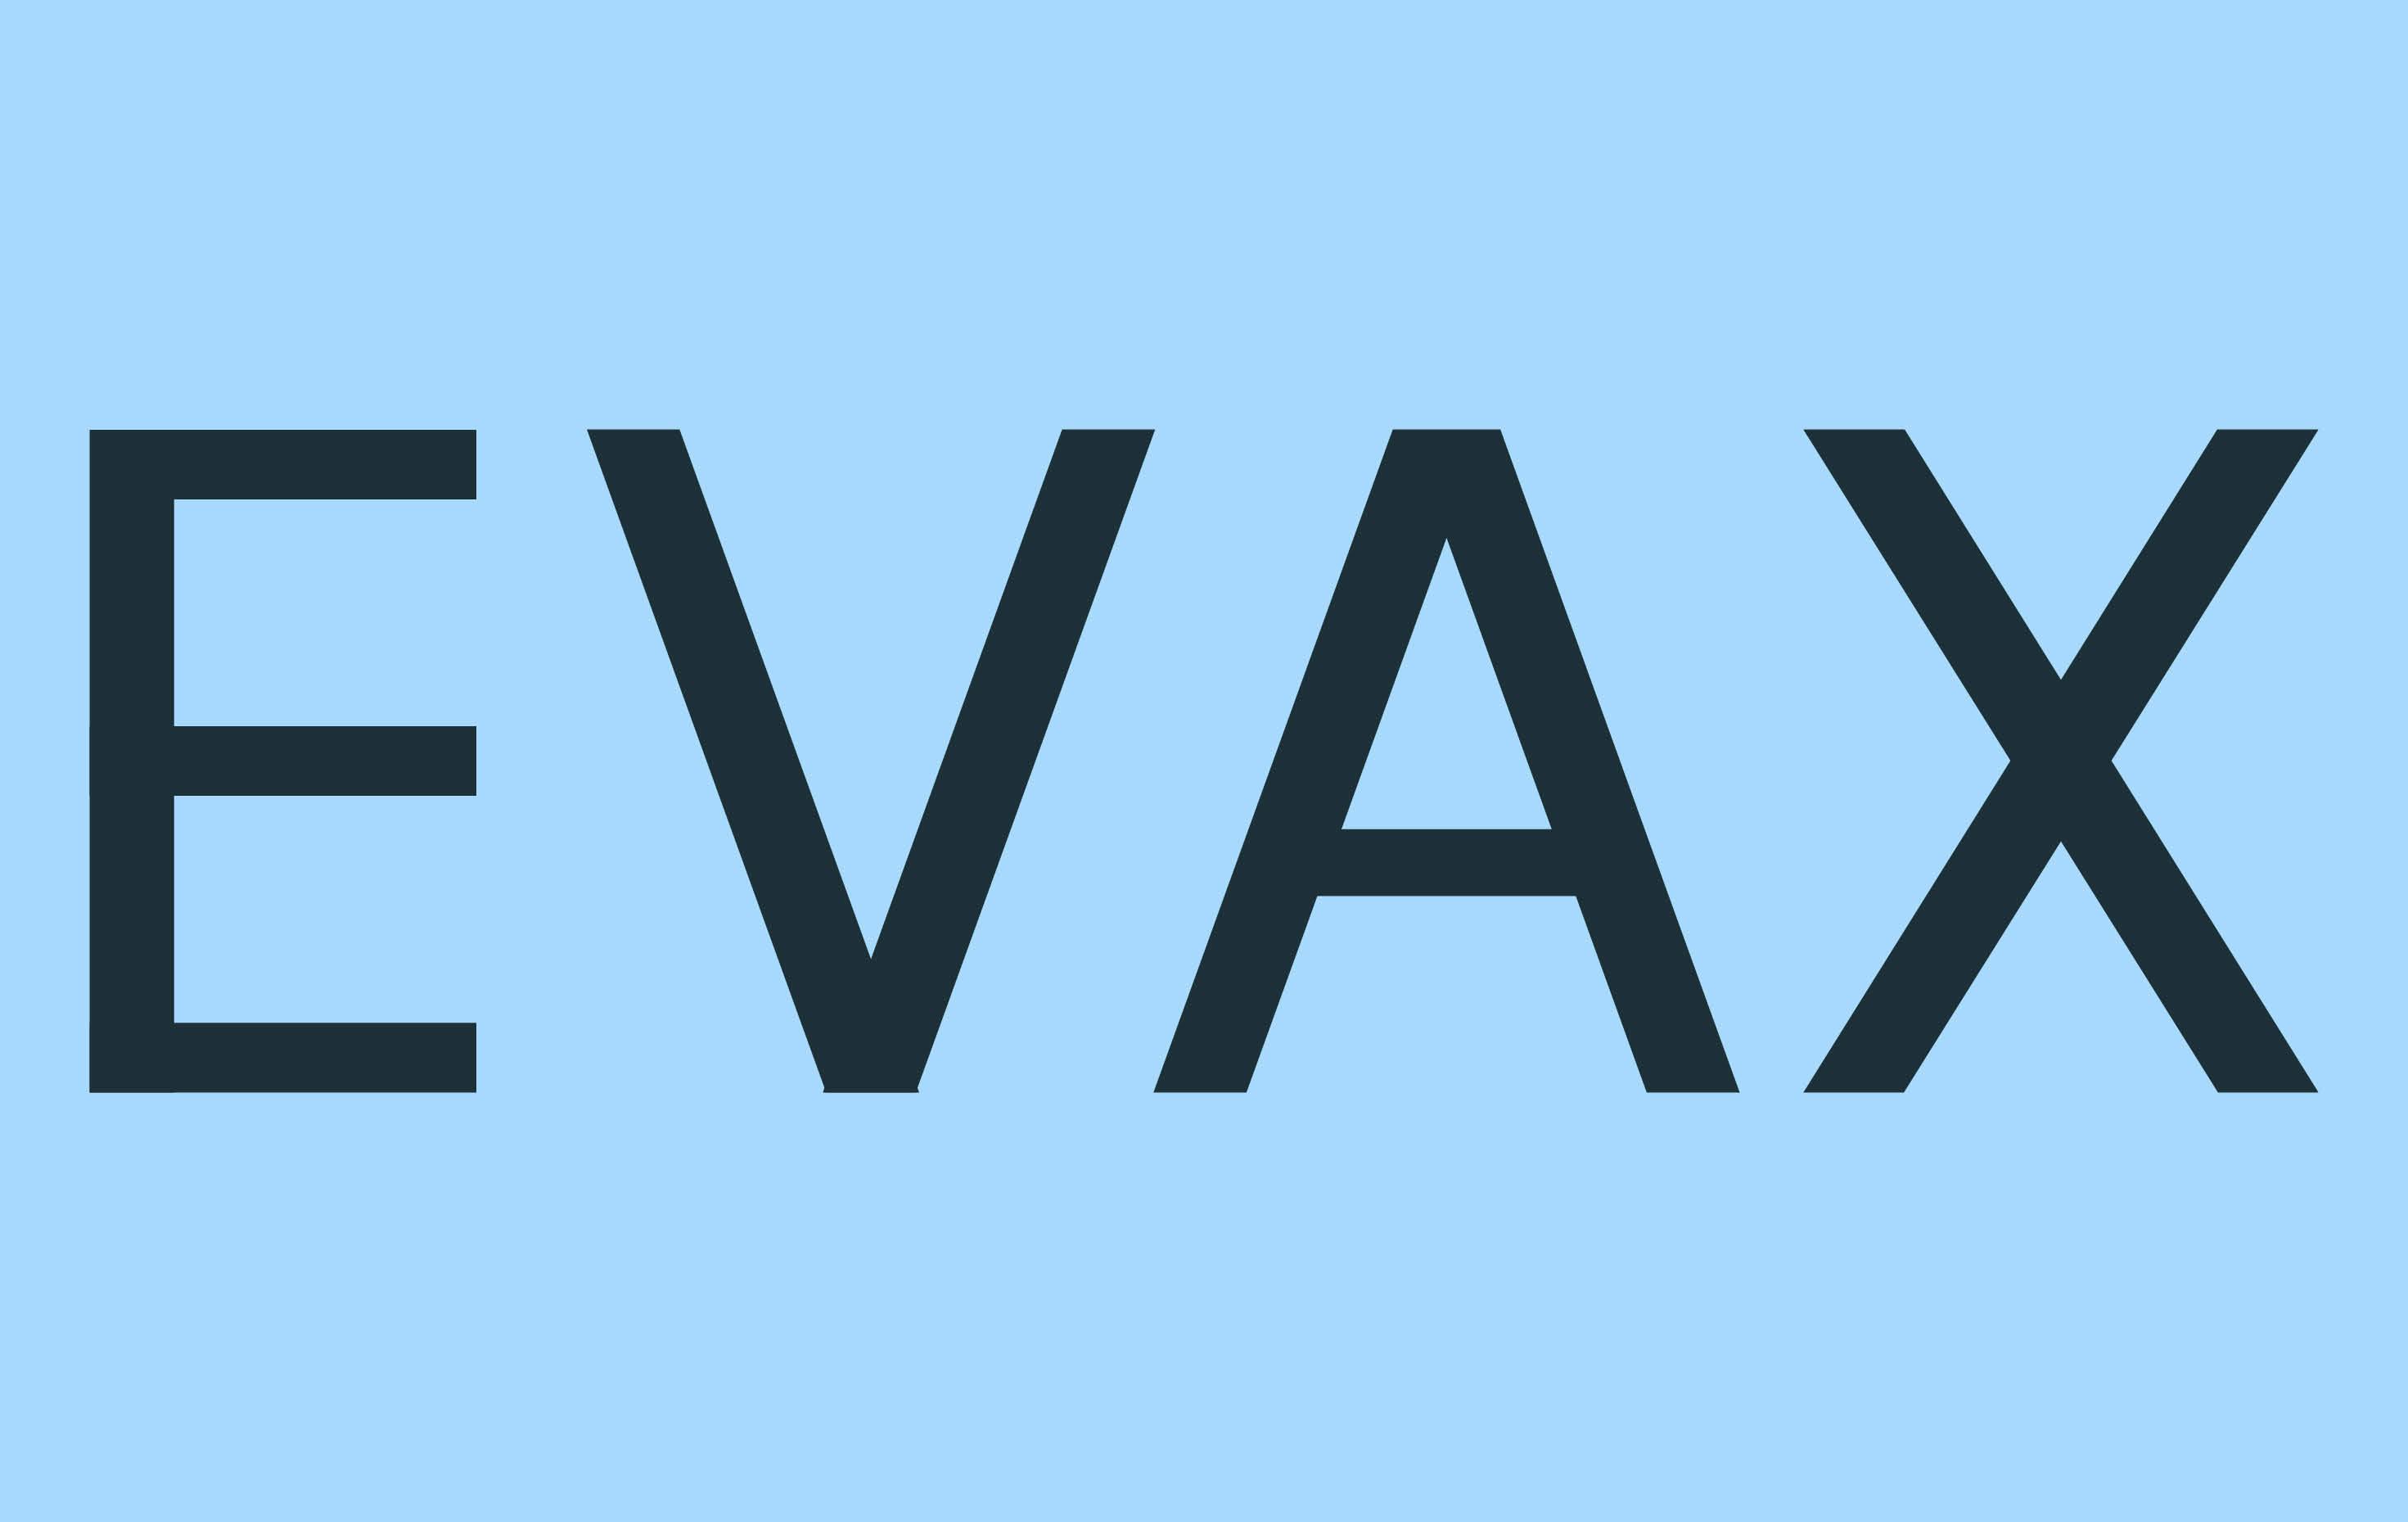 Evaxion to Present New Positive Data from Ongoing Phase 2 Study on Lead Vaccine Candidate EVX-01 at the American Society of Clinical Oncology Annual Meeting 2024